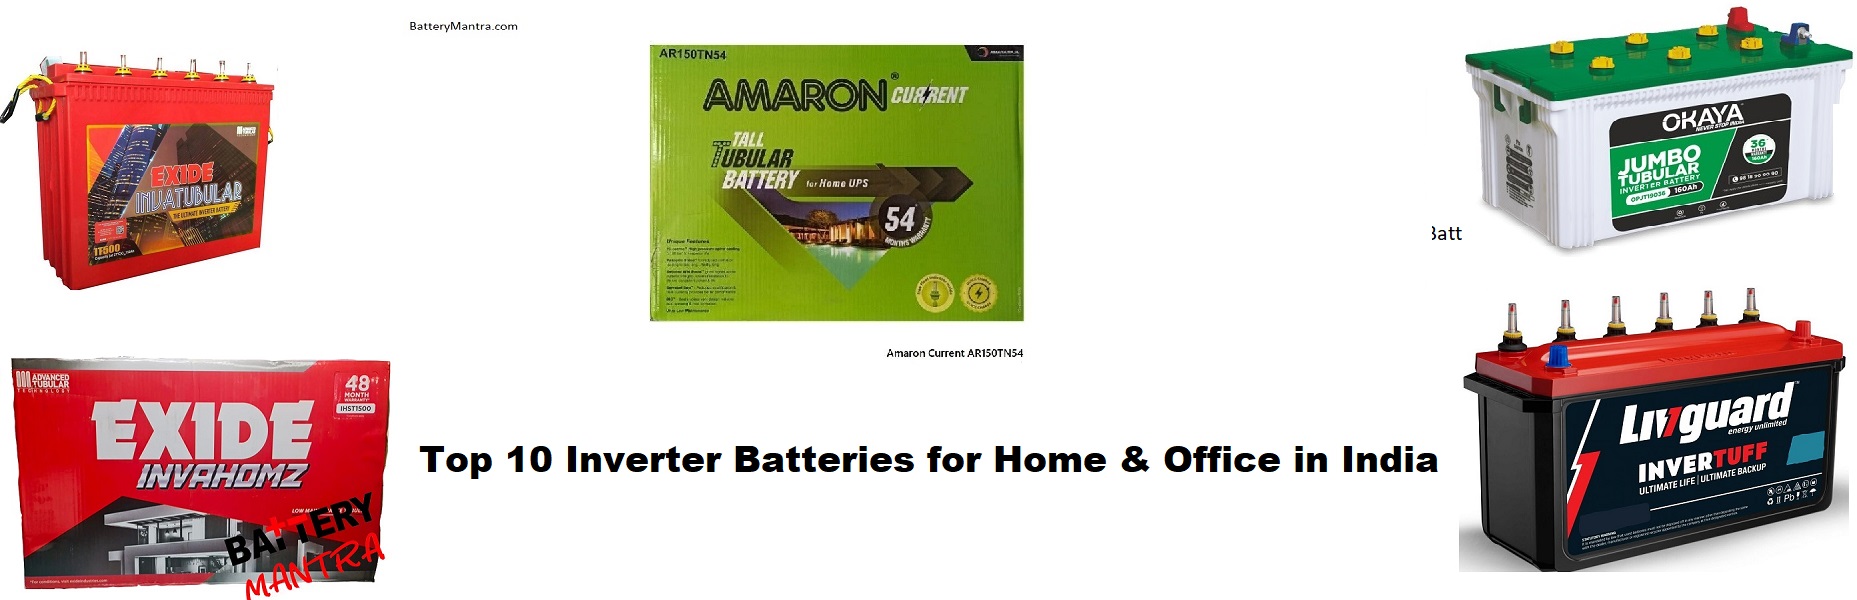 Top 10 Inverter Batteries for Home & Office in India 